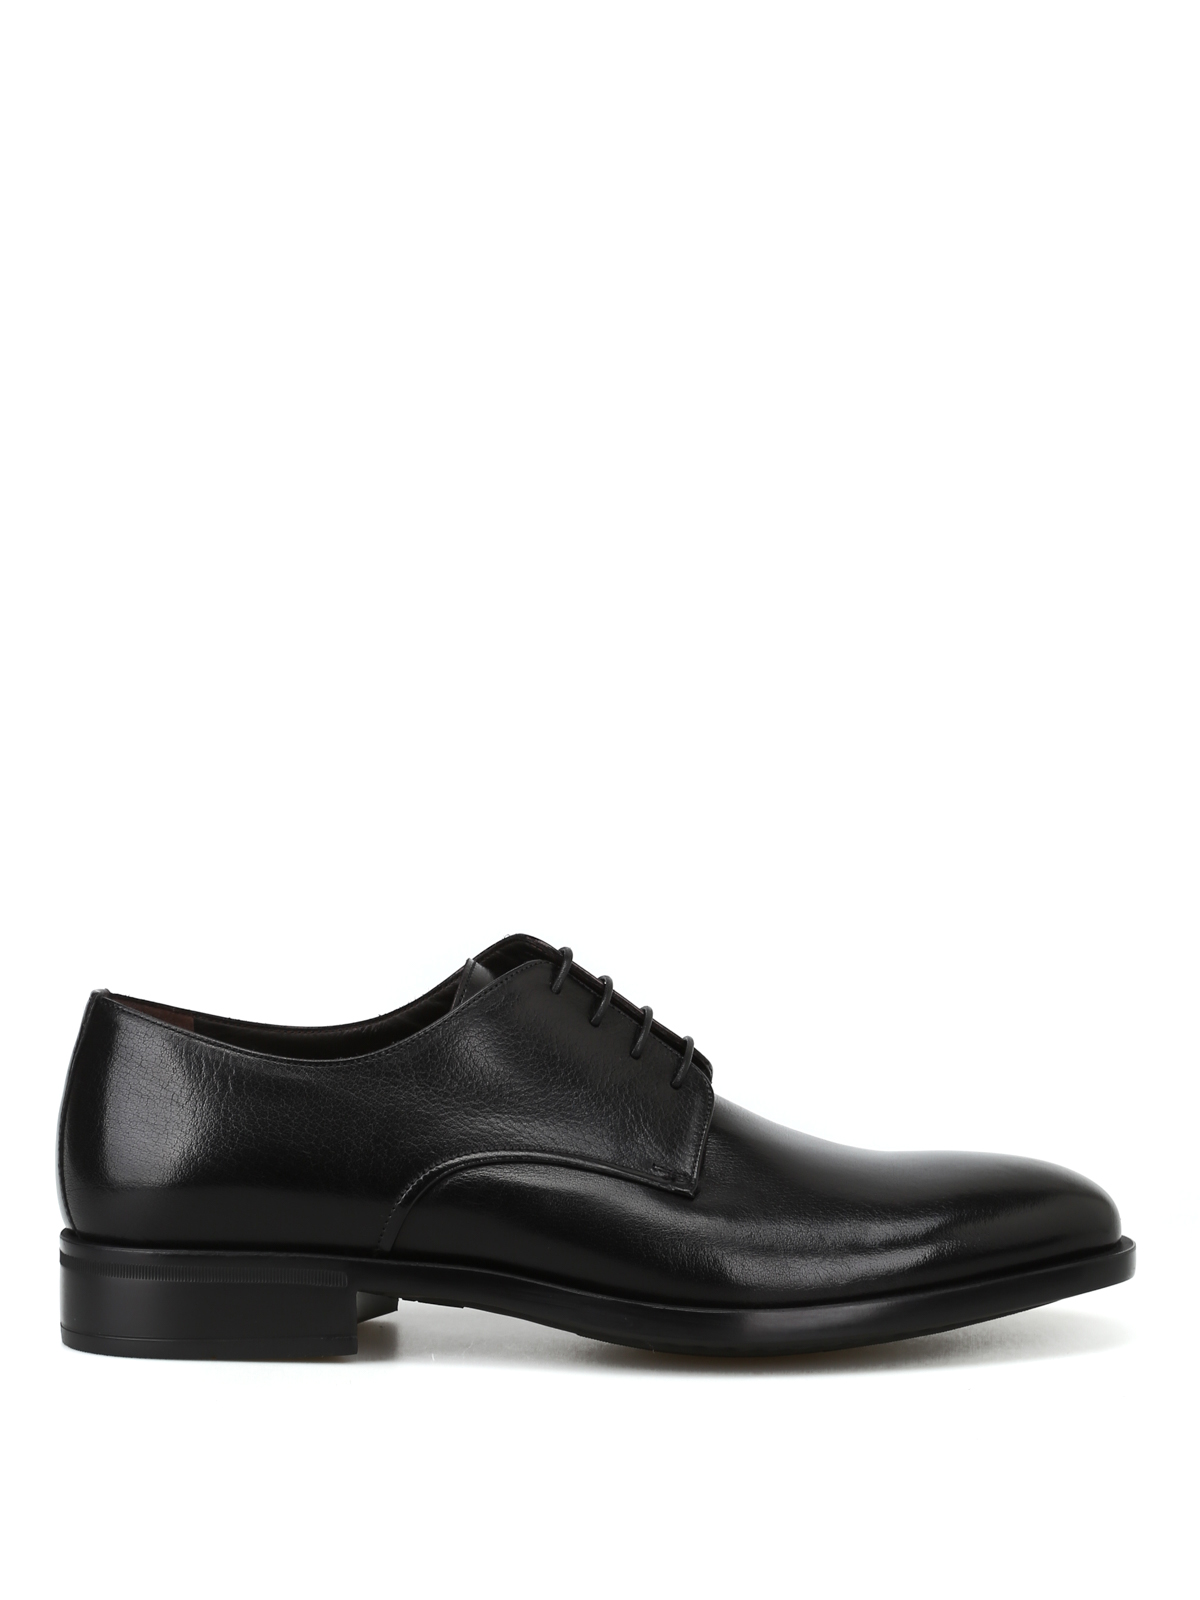 Moreschi - Black leather ultralight Derby shoes - lace-ups shoes ...